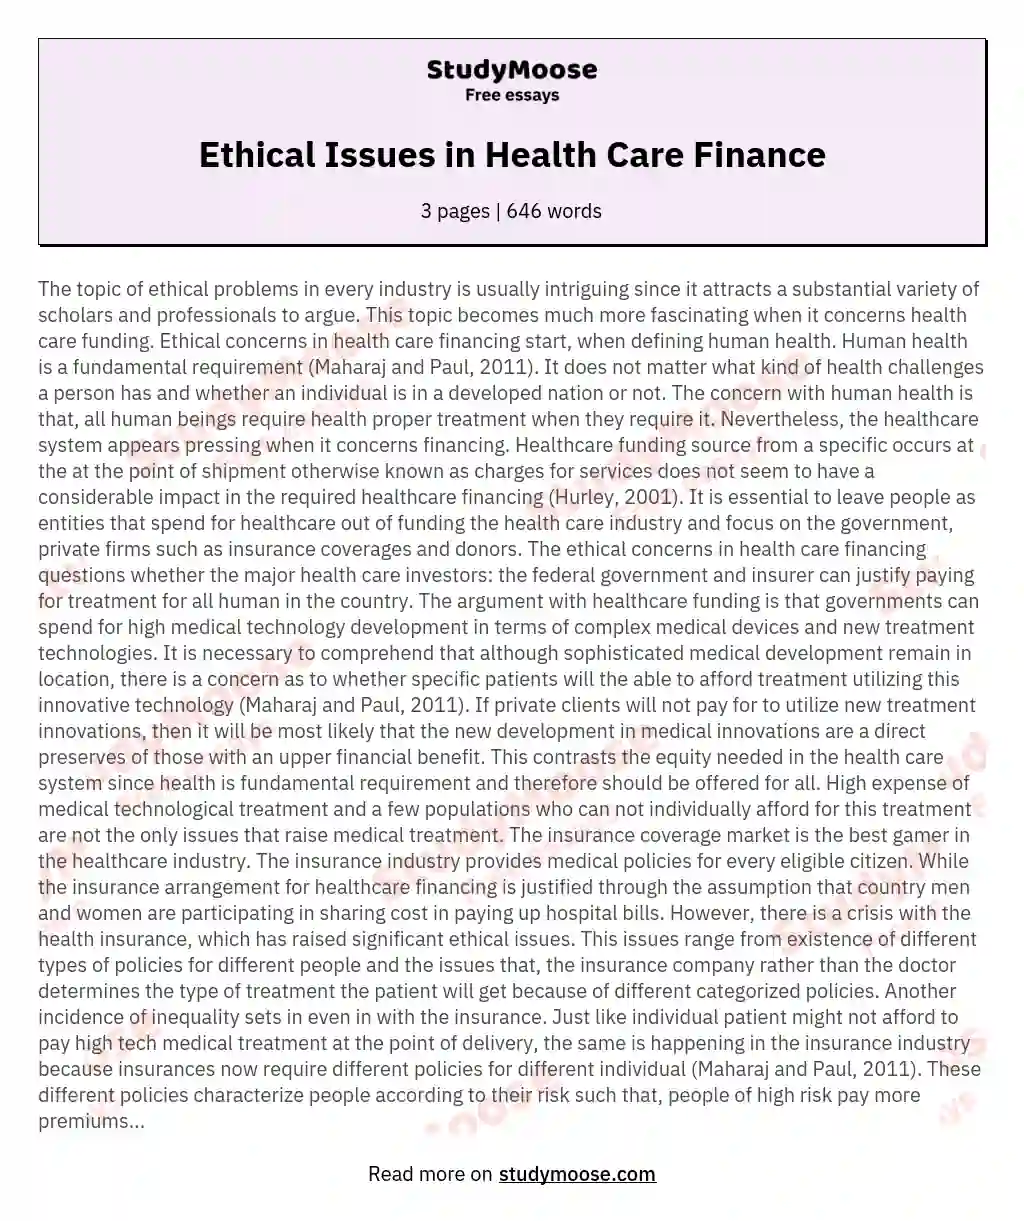 Ethical Issues in Health Care Finance essay